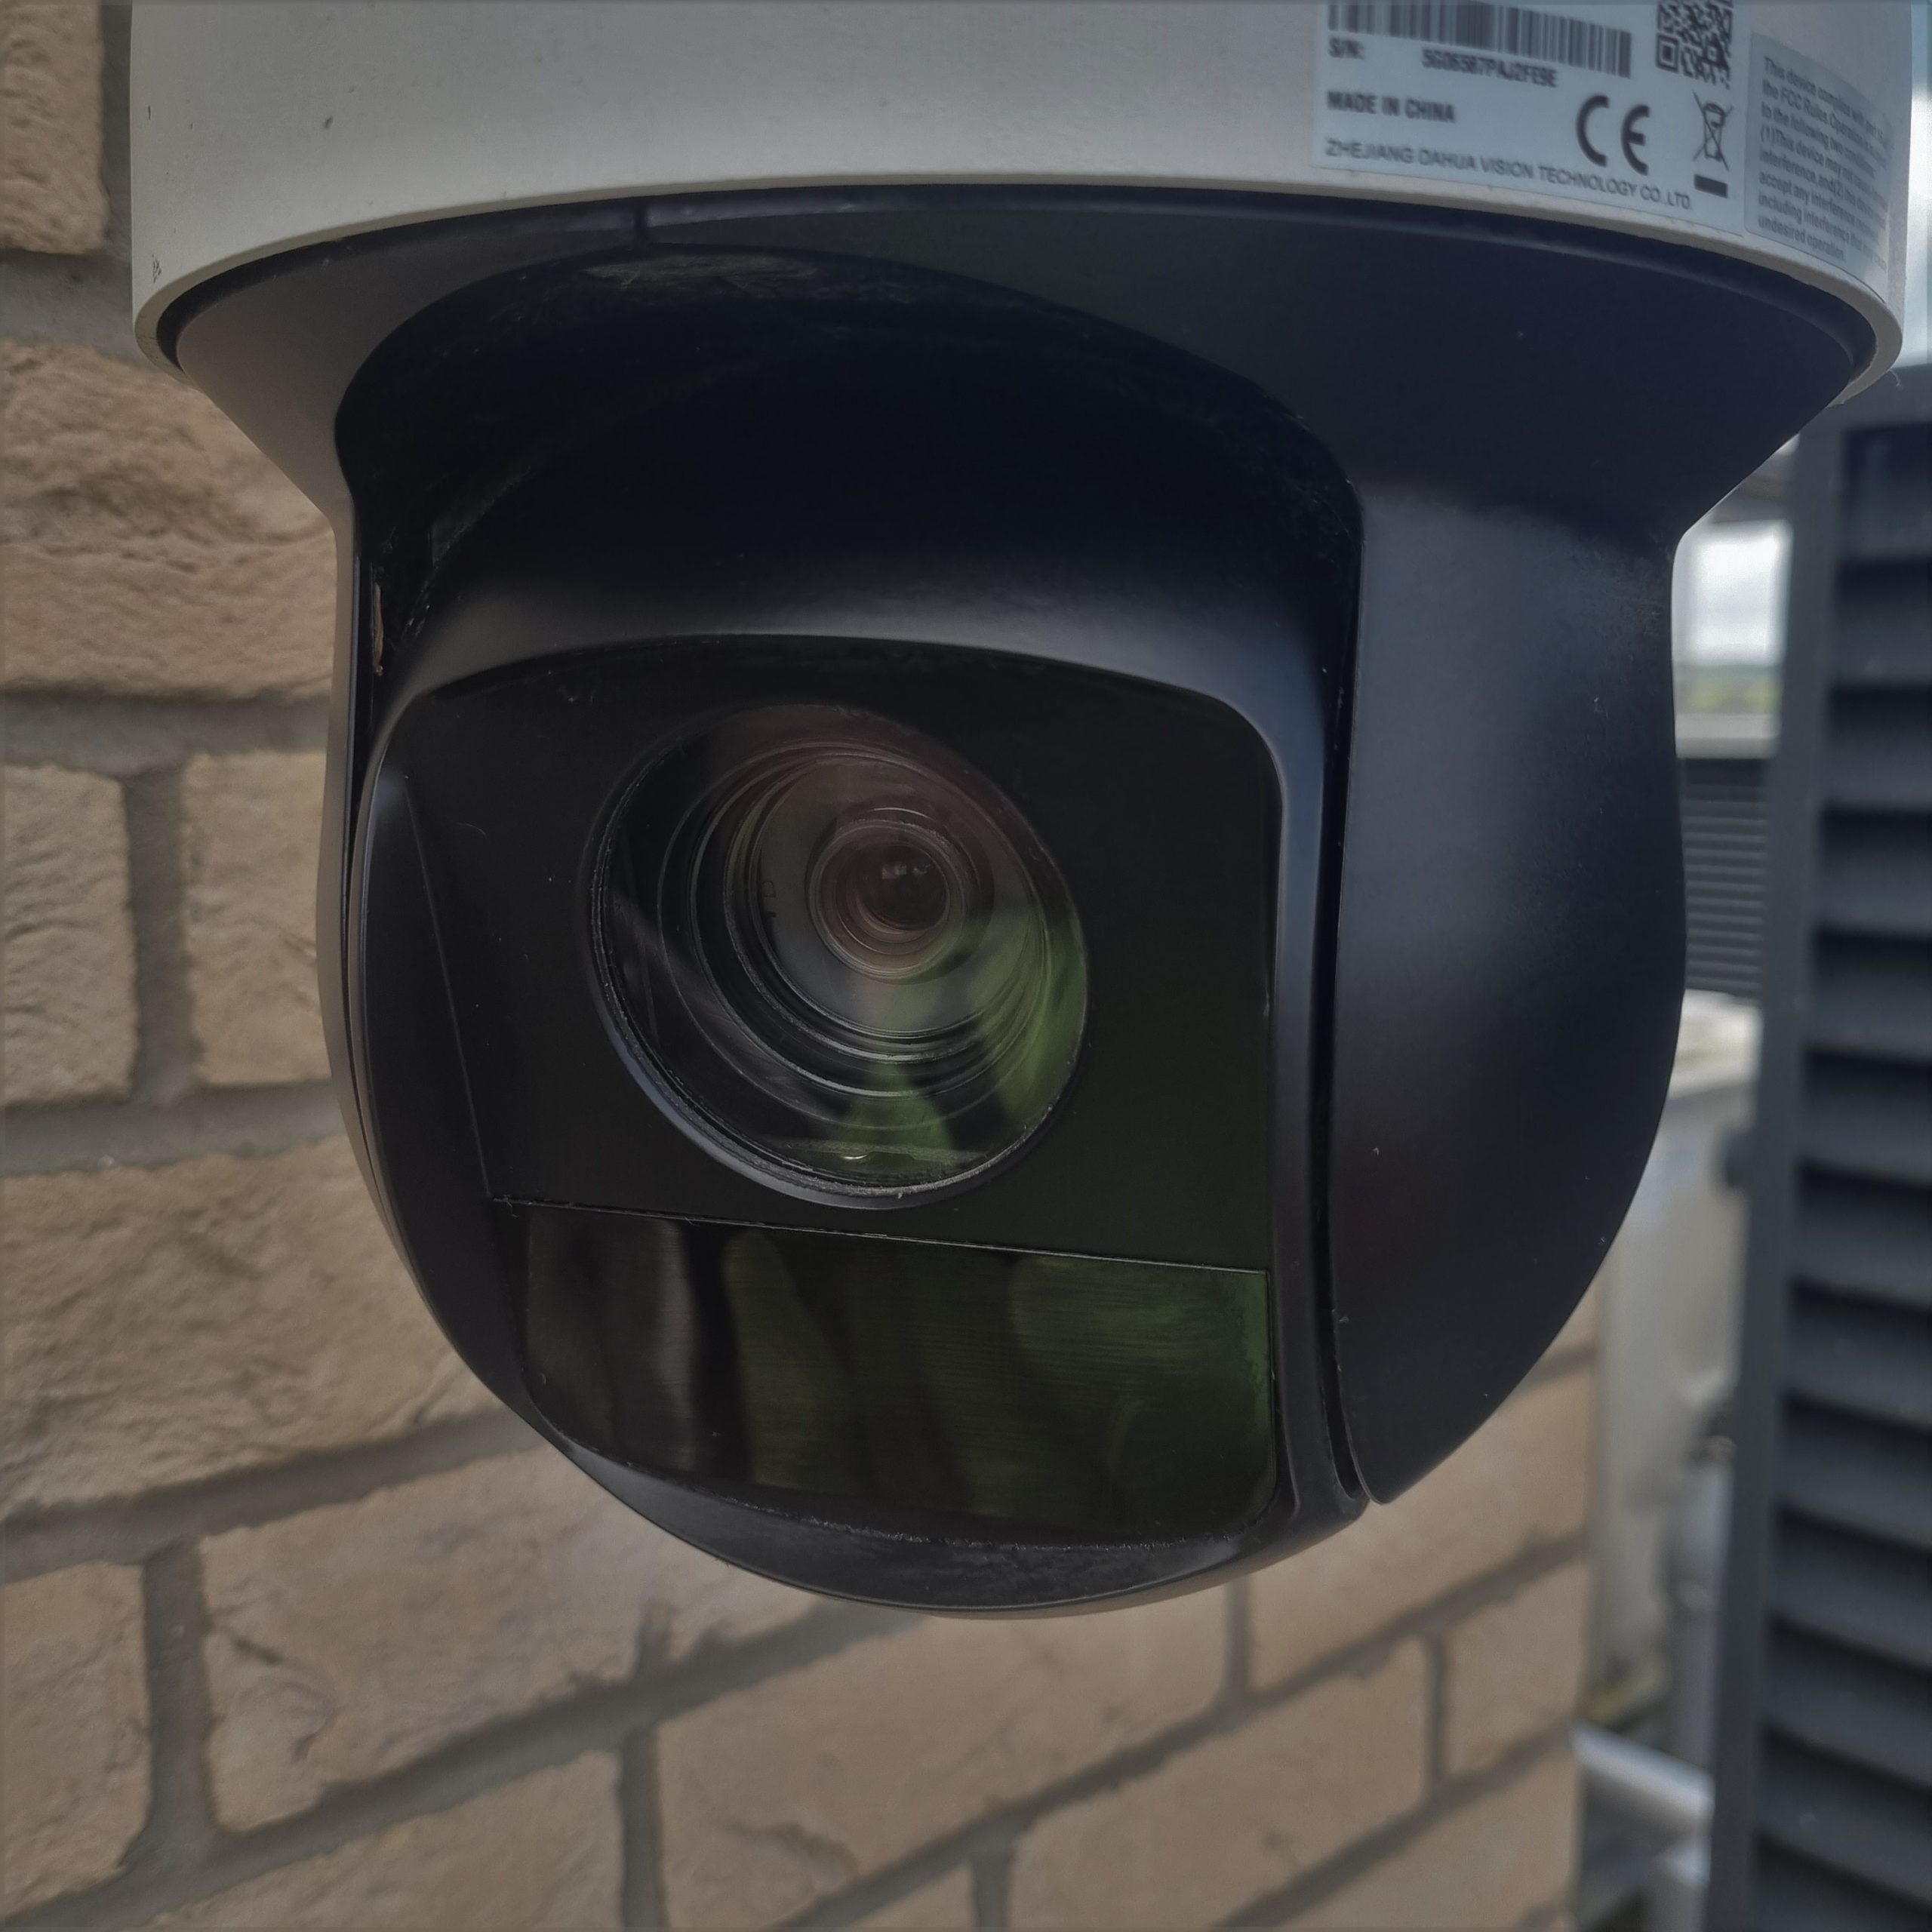 Image of a CCTV camera that is mounted on a wall